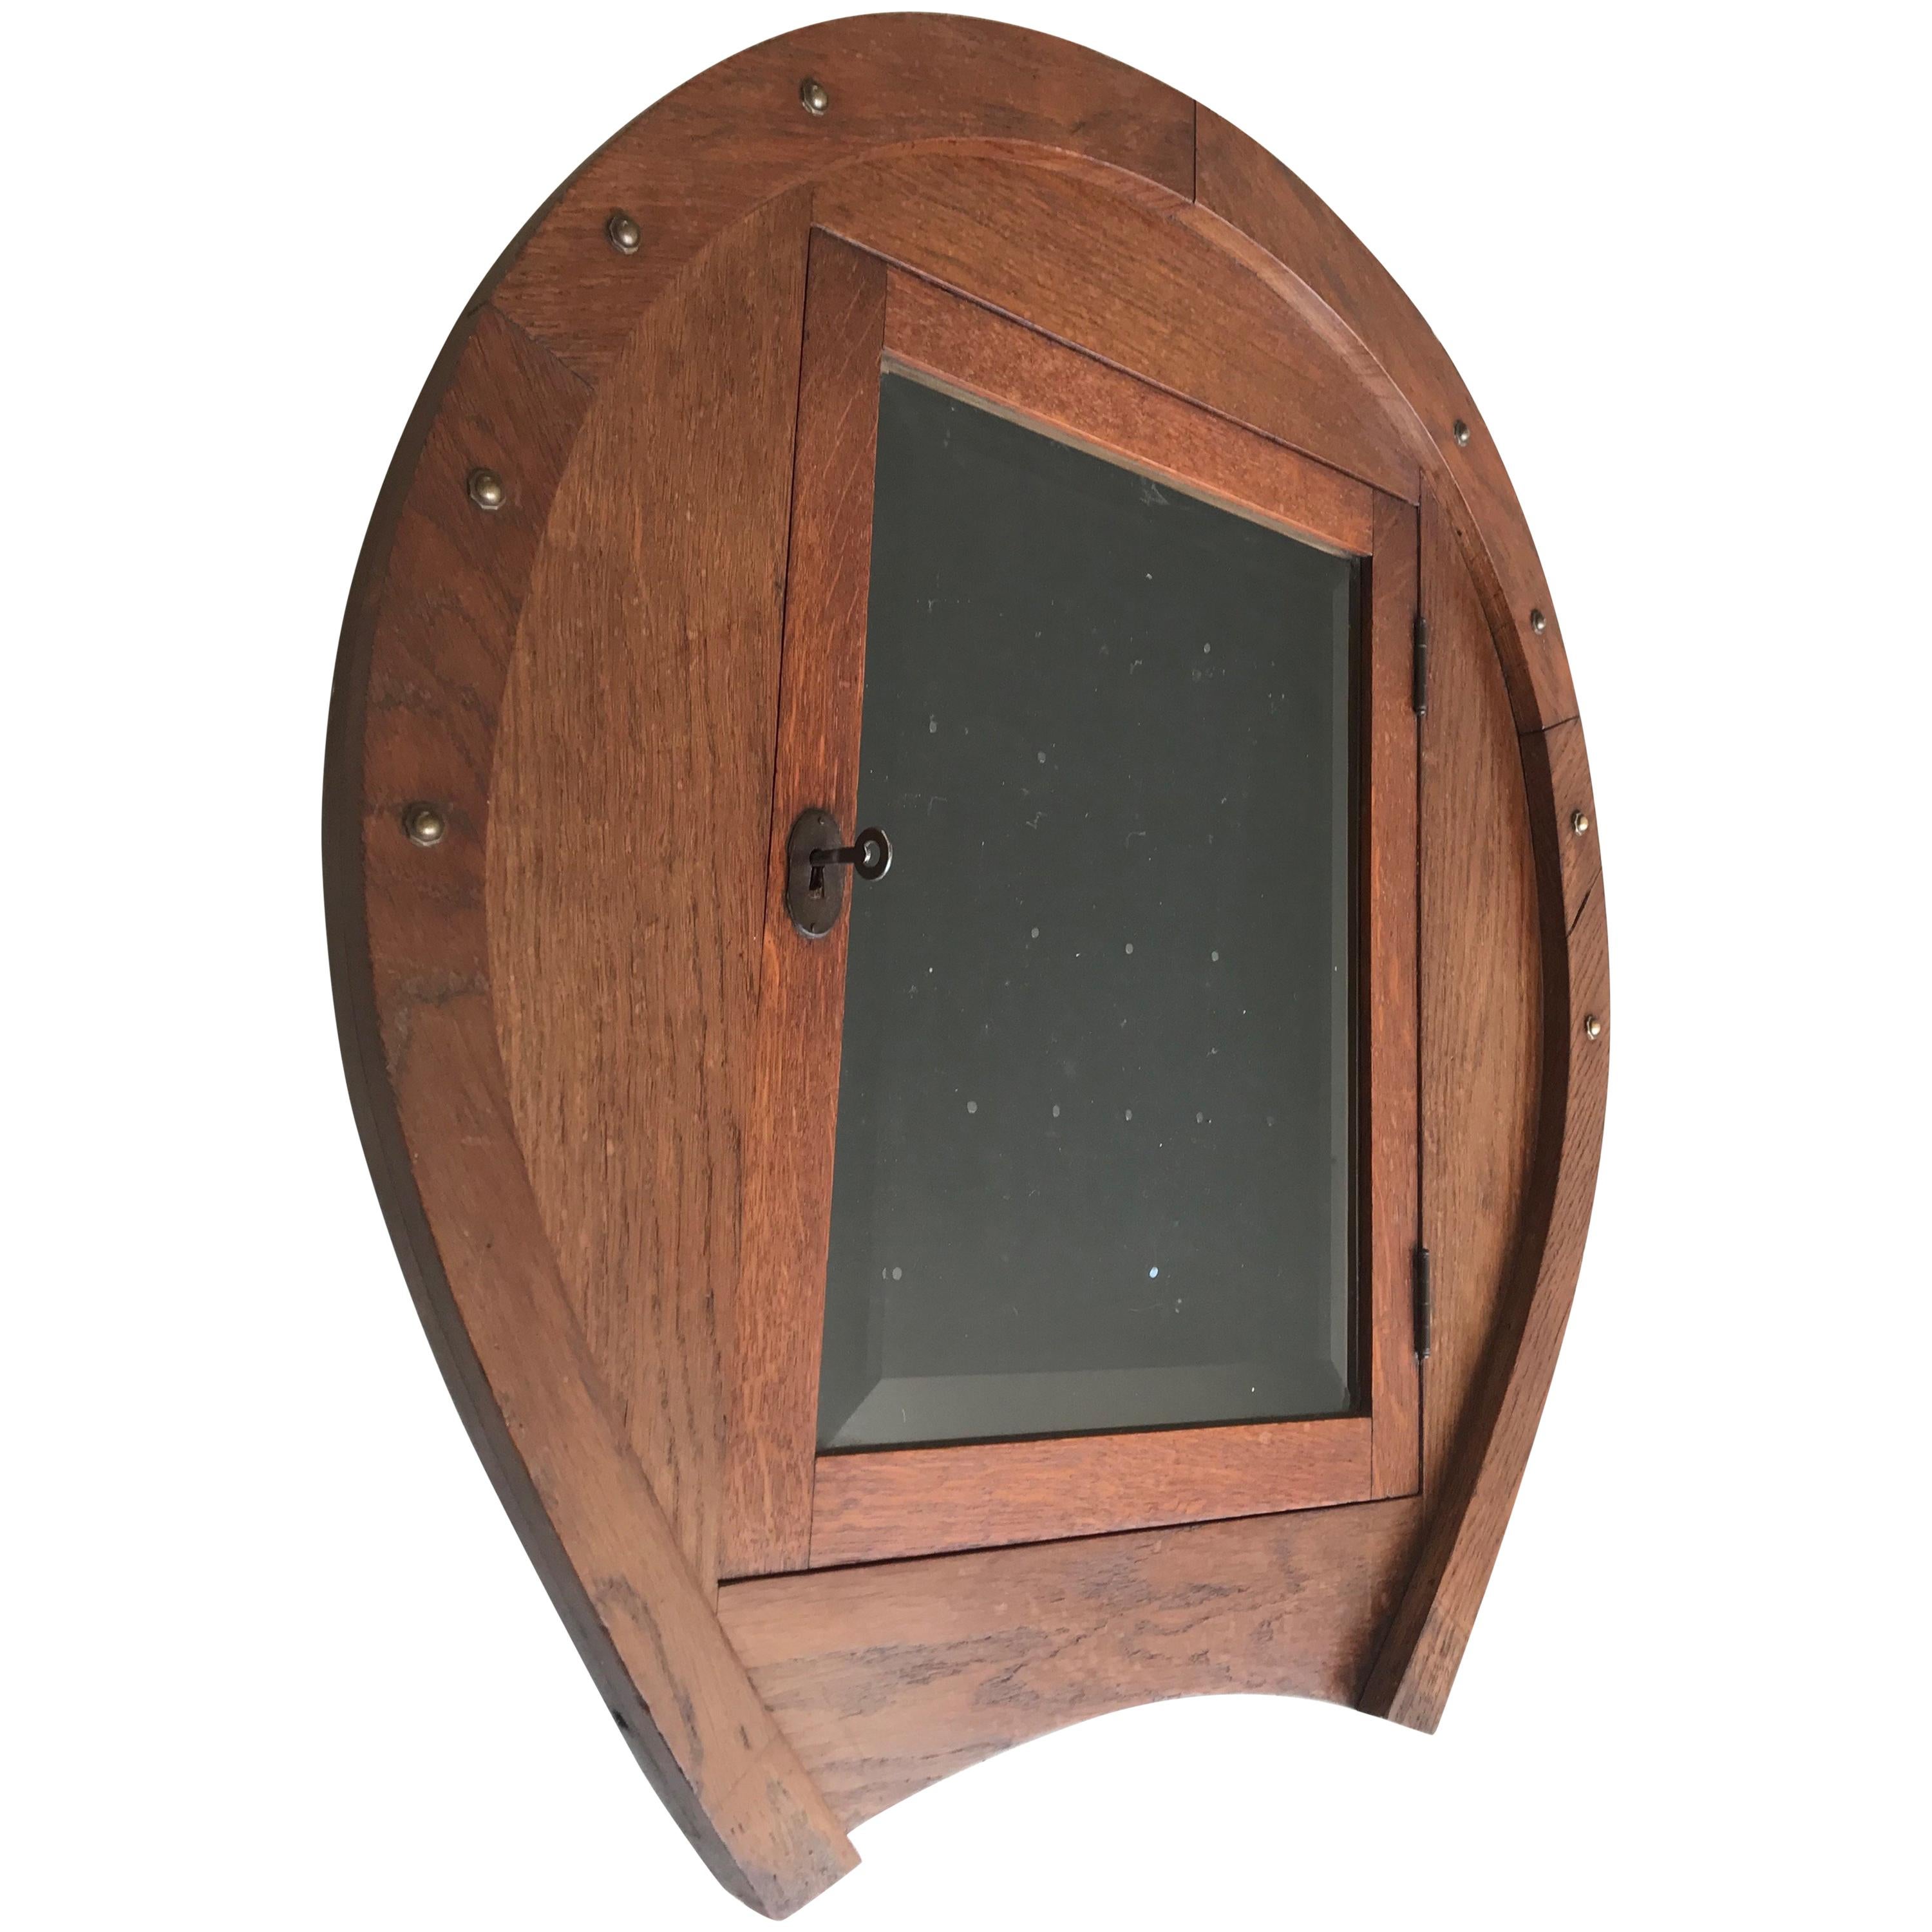 Unique Early 1900s Horse Shoe Shape Display Wall Cabinet with Beveled Glass Door